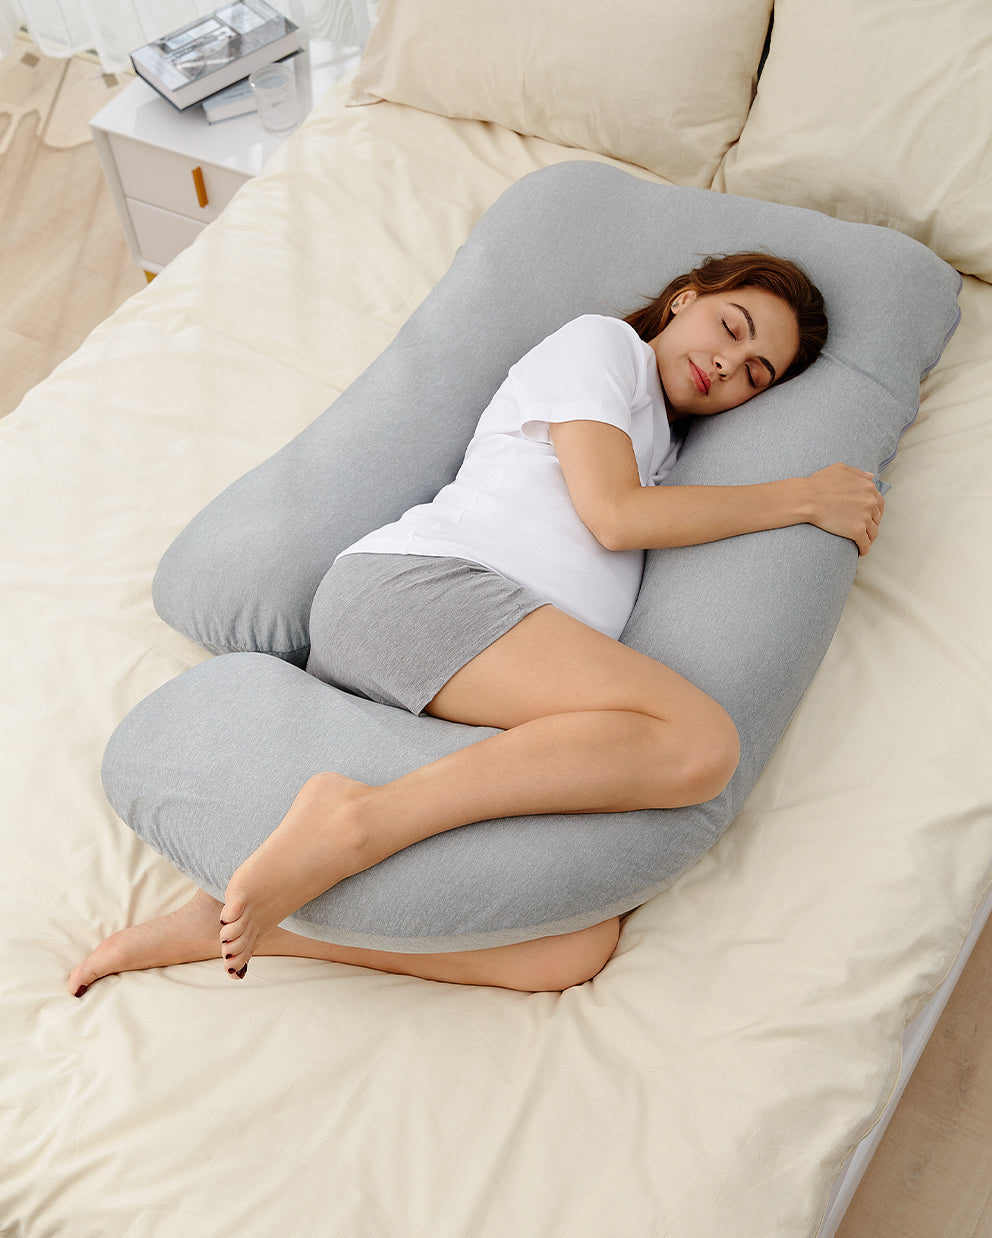 Momcozy Pregnancy Pillows with Cooling Cover, U-Shaped Full Body Maternity  Pillow for Side Sleepers 57 inch Gray 